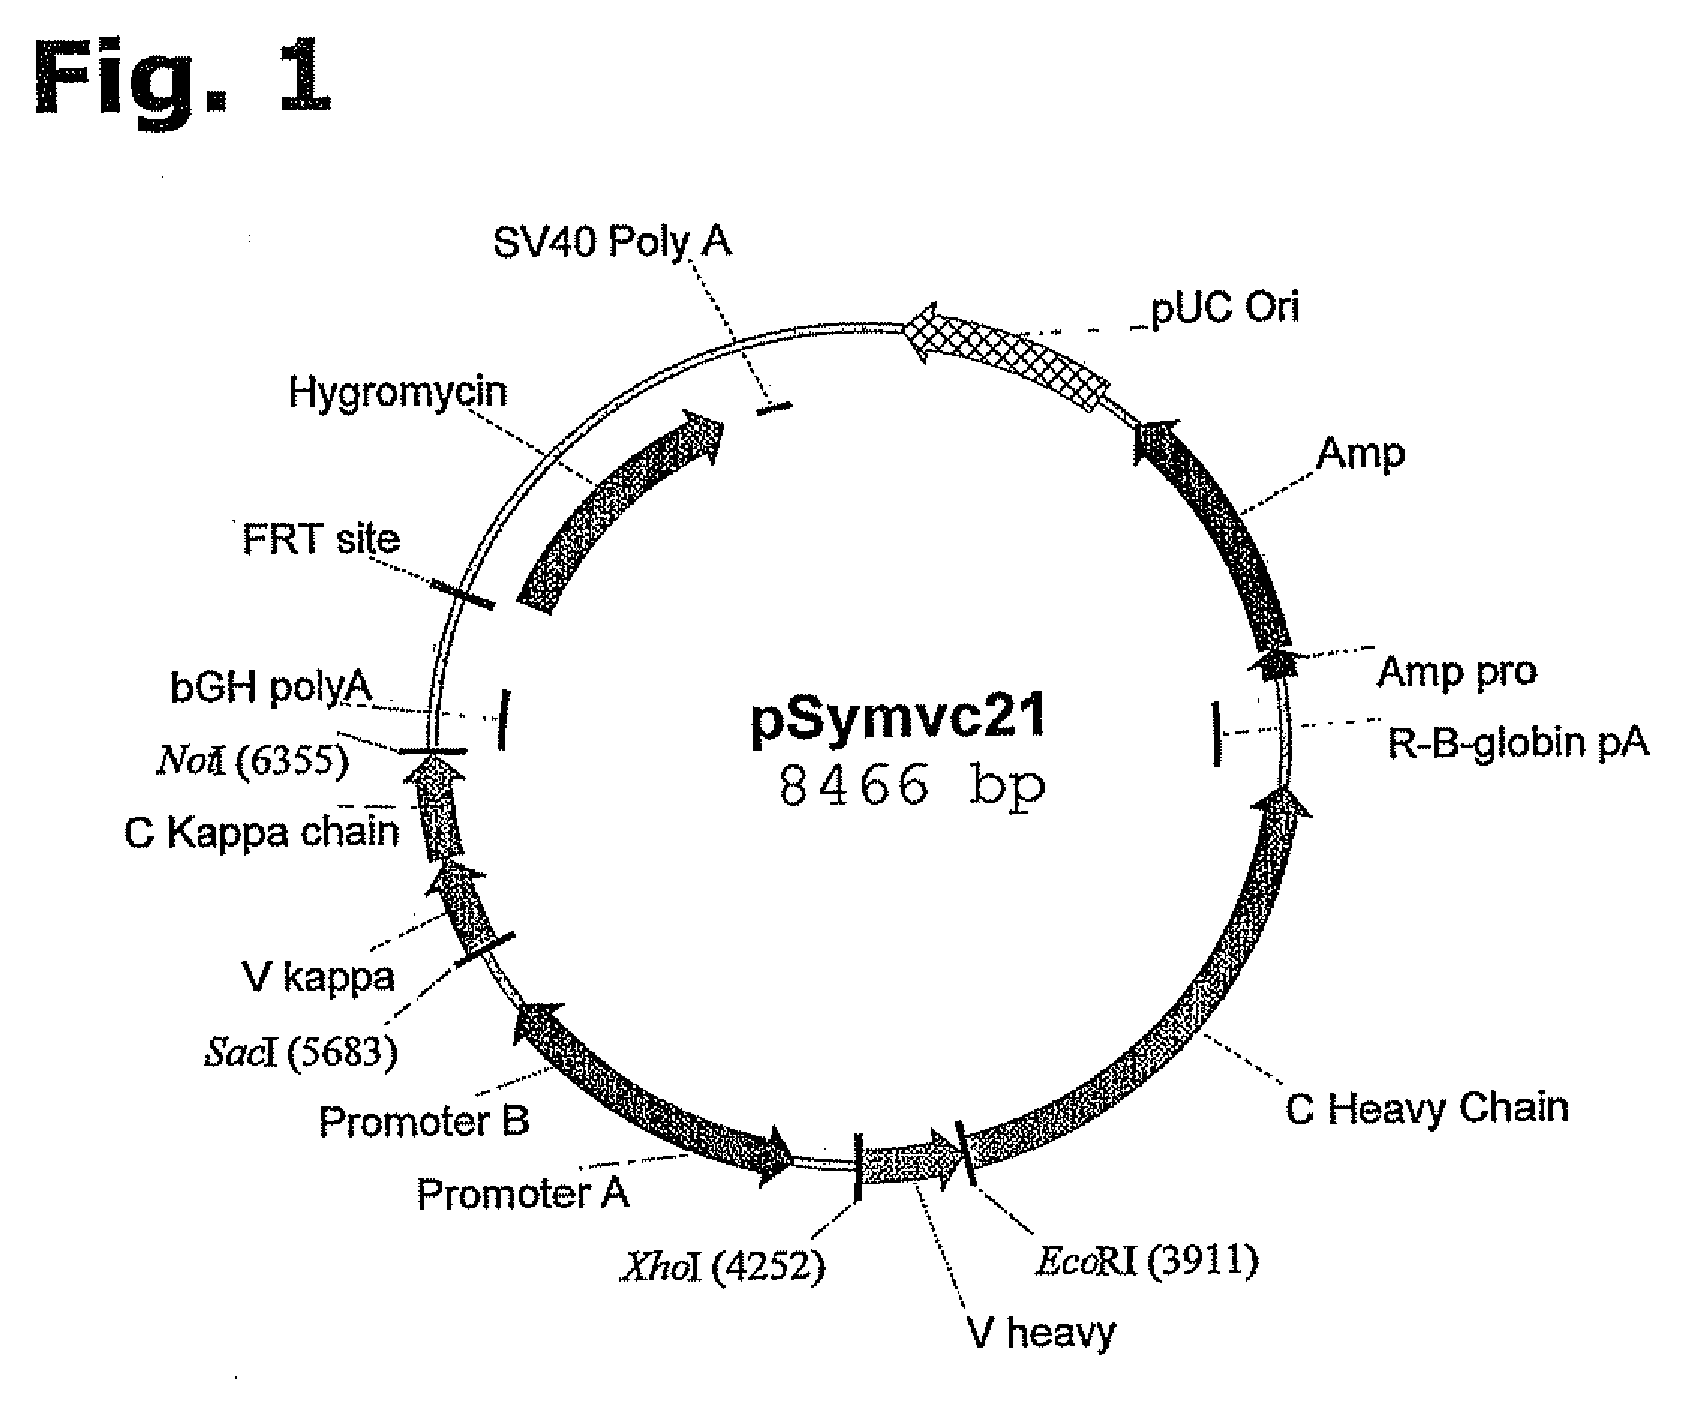 Method for Manufacturing Recombinant Polyclonal Proteins